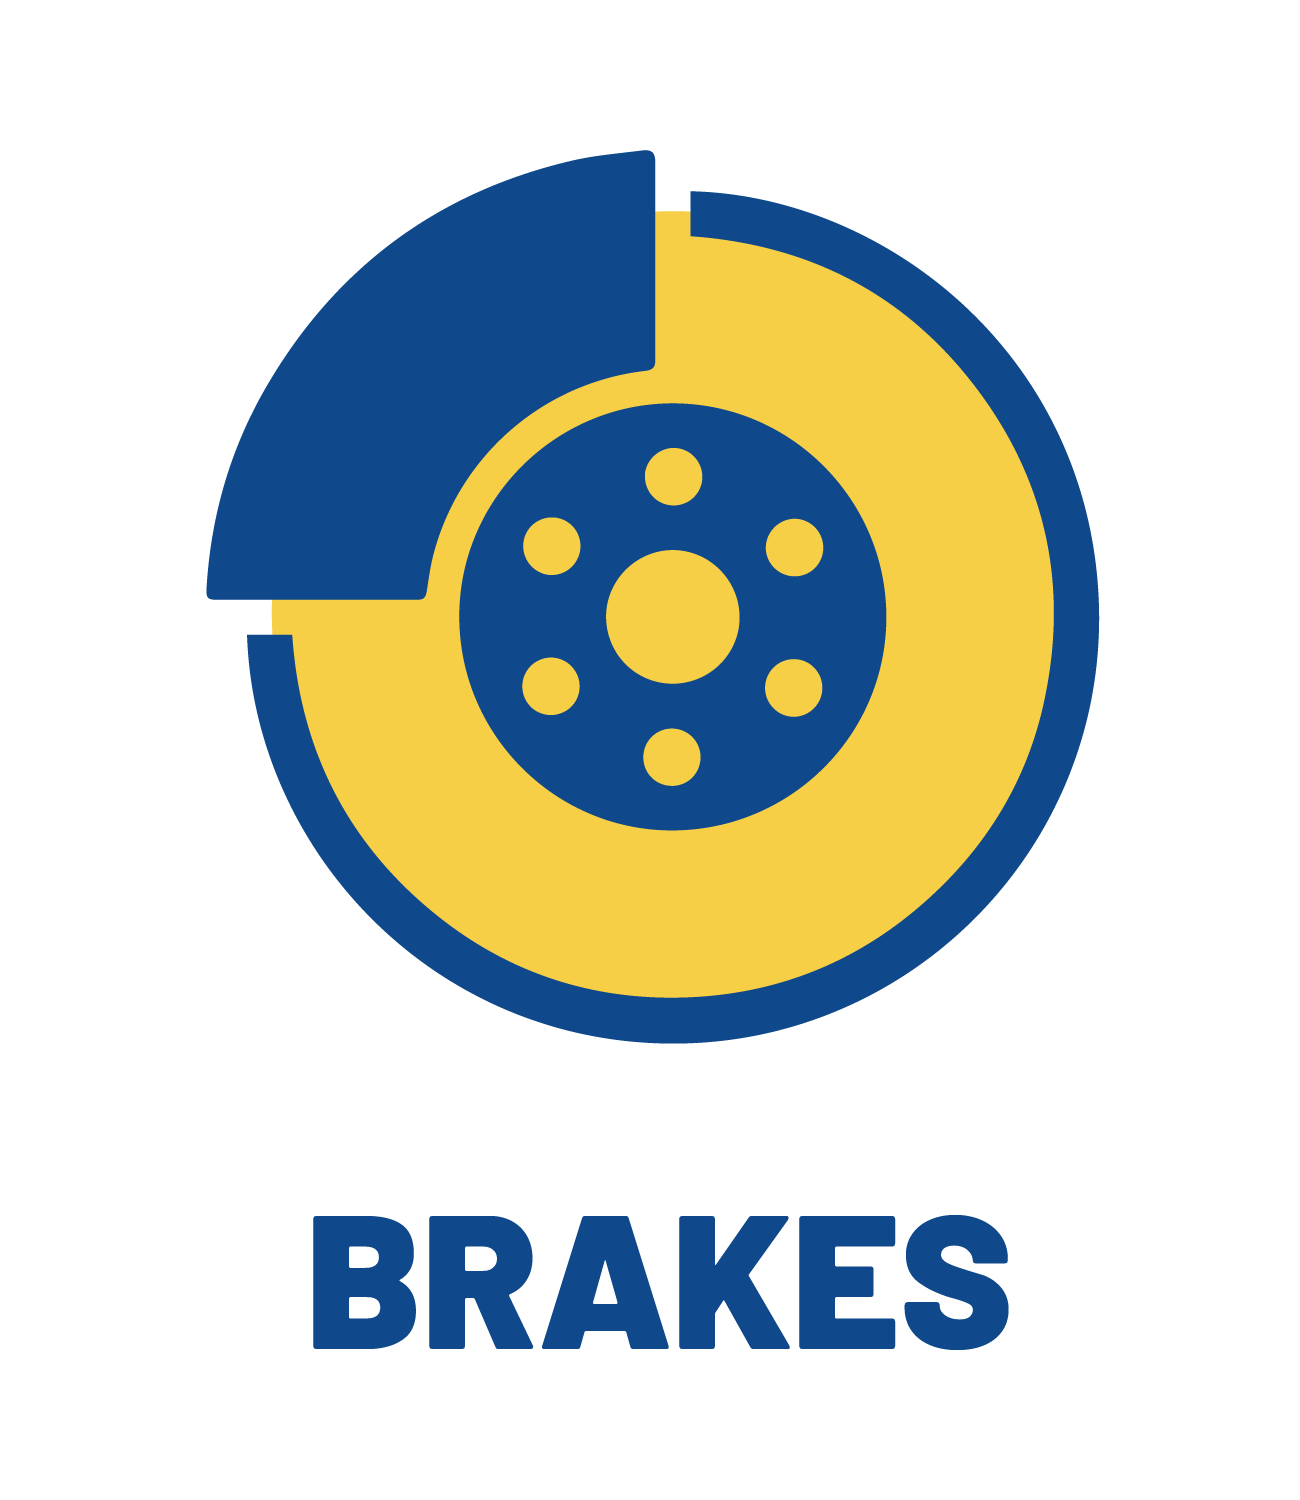 Learn more about brake services